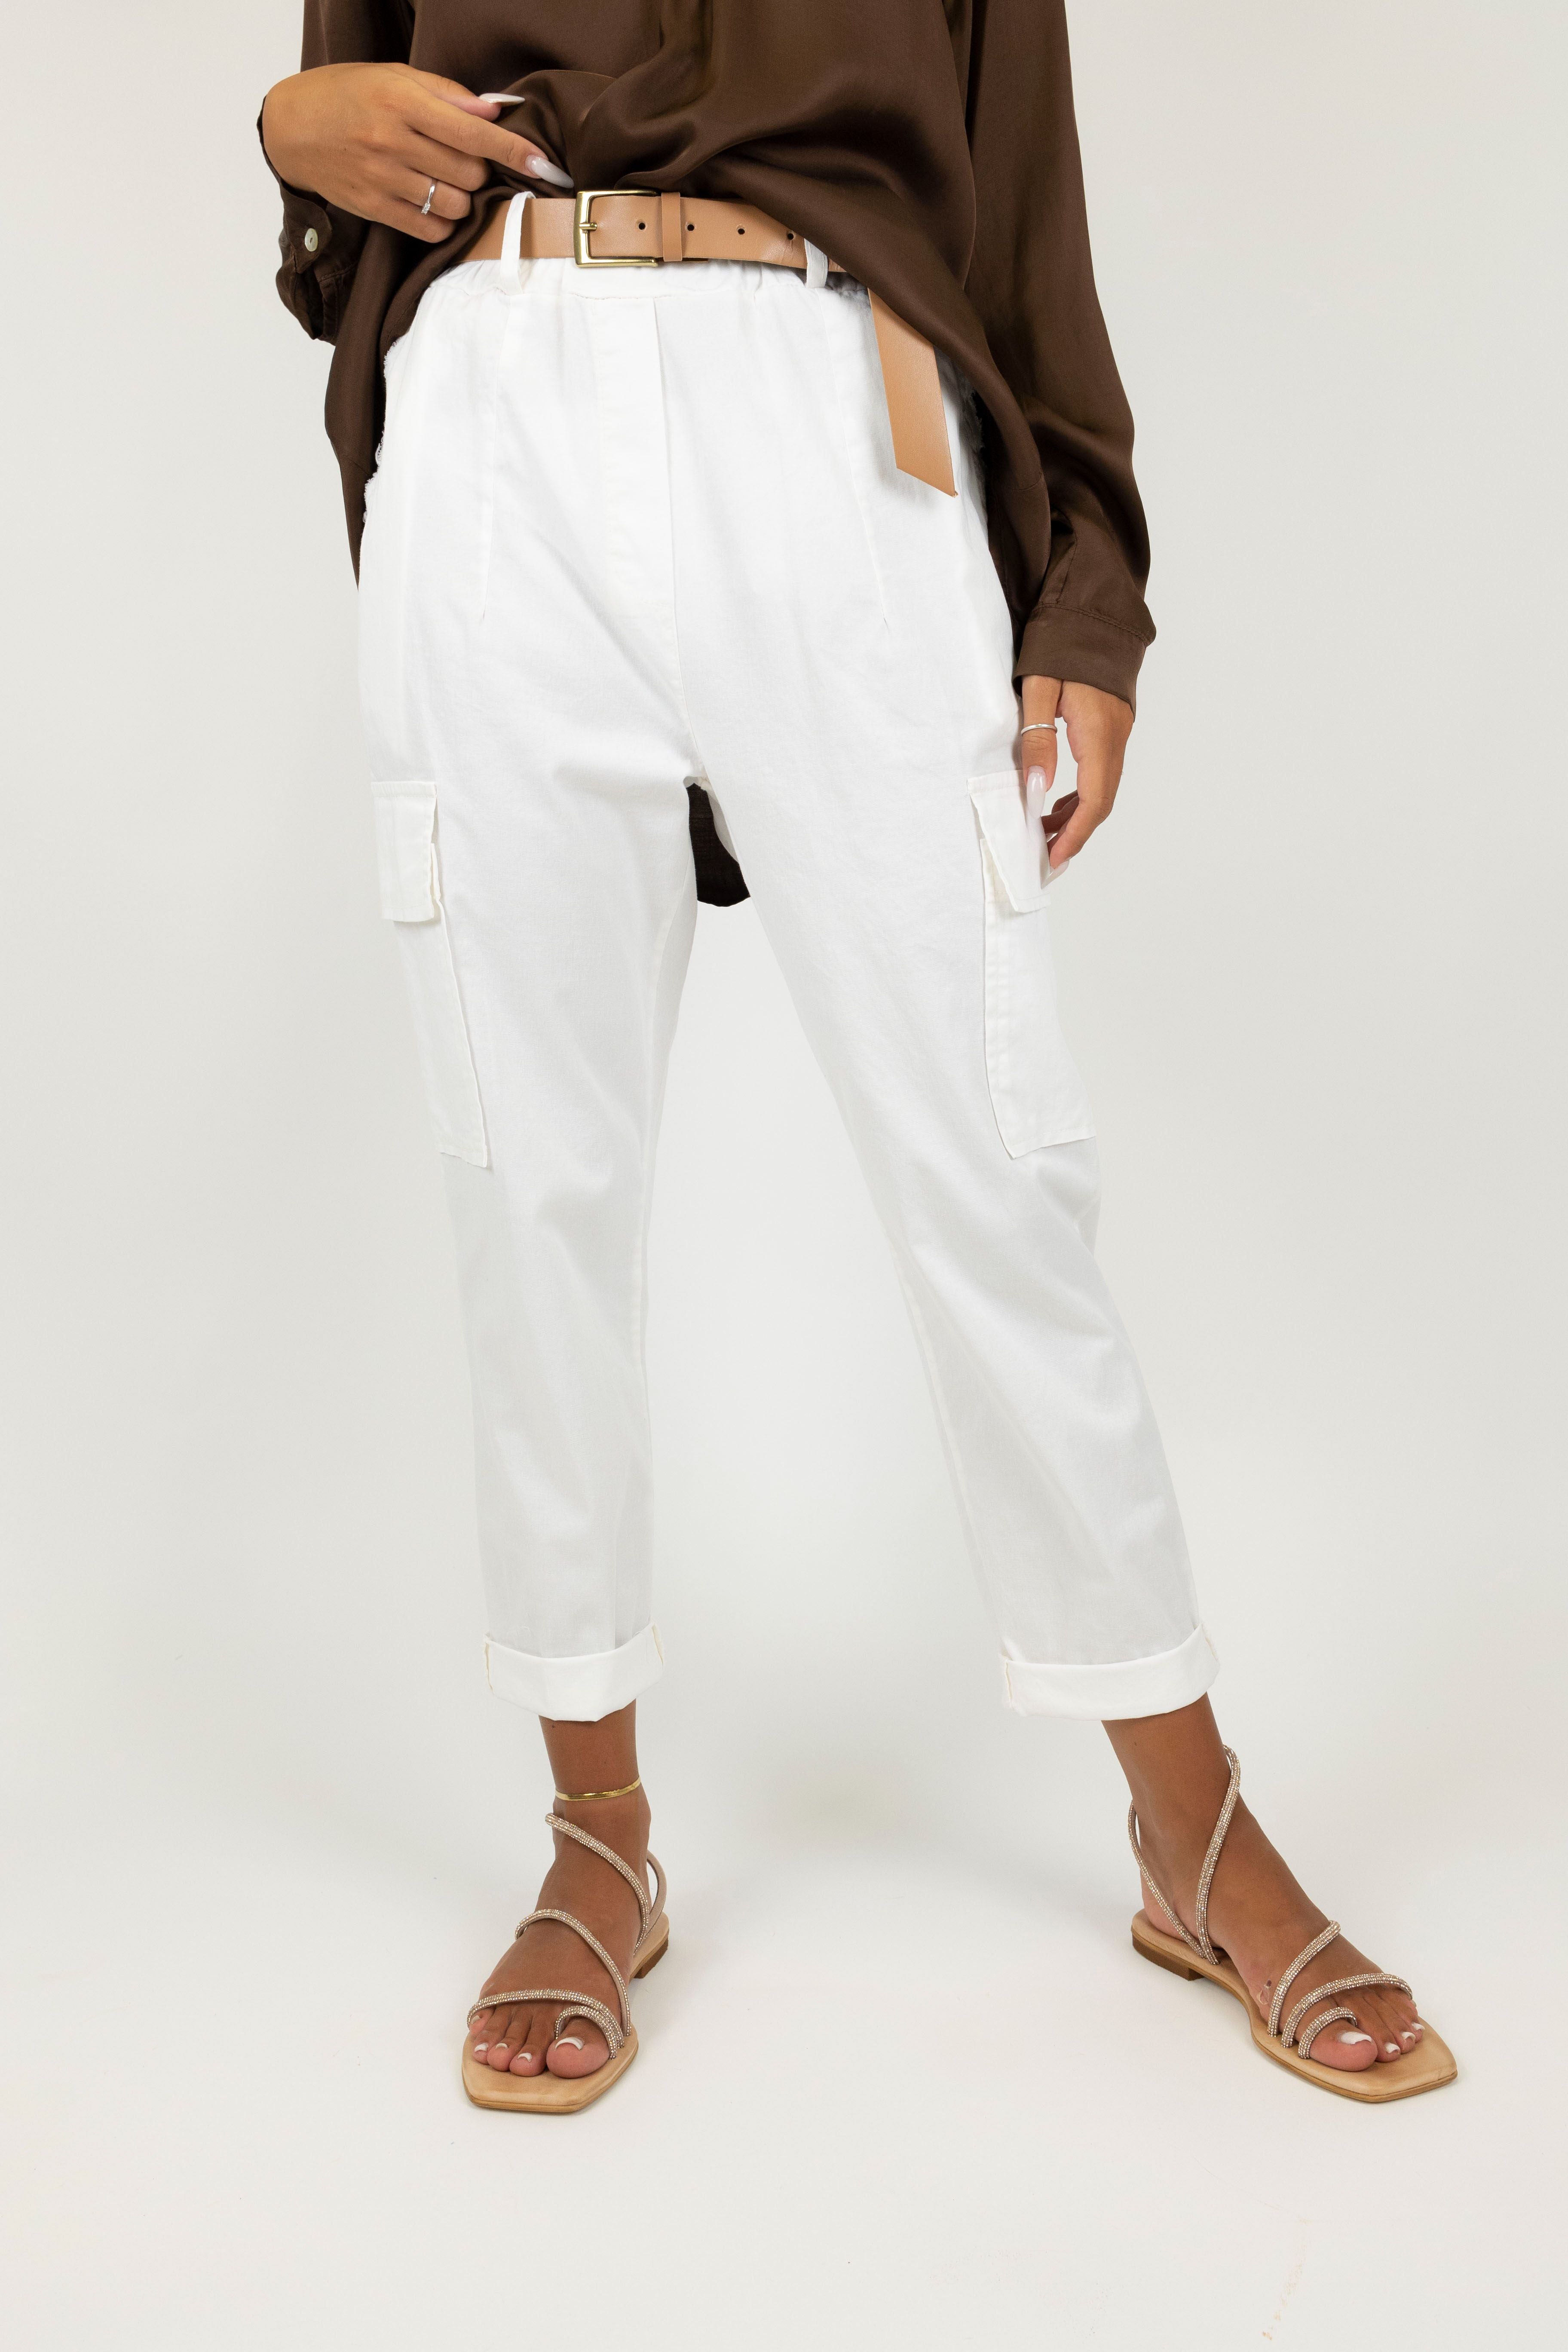 Motel - Trousers with fringed pocket and large side pockets